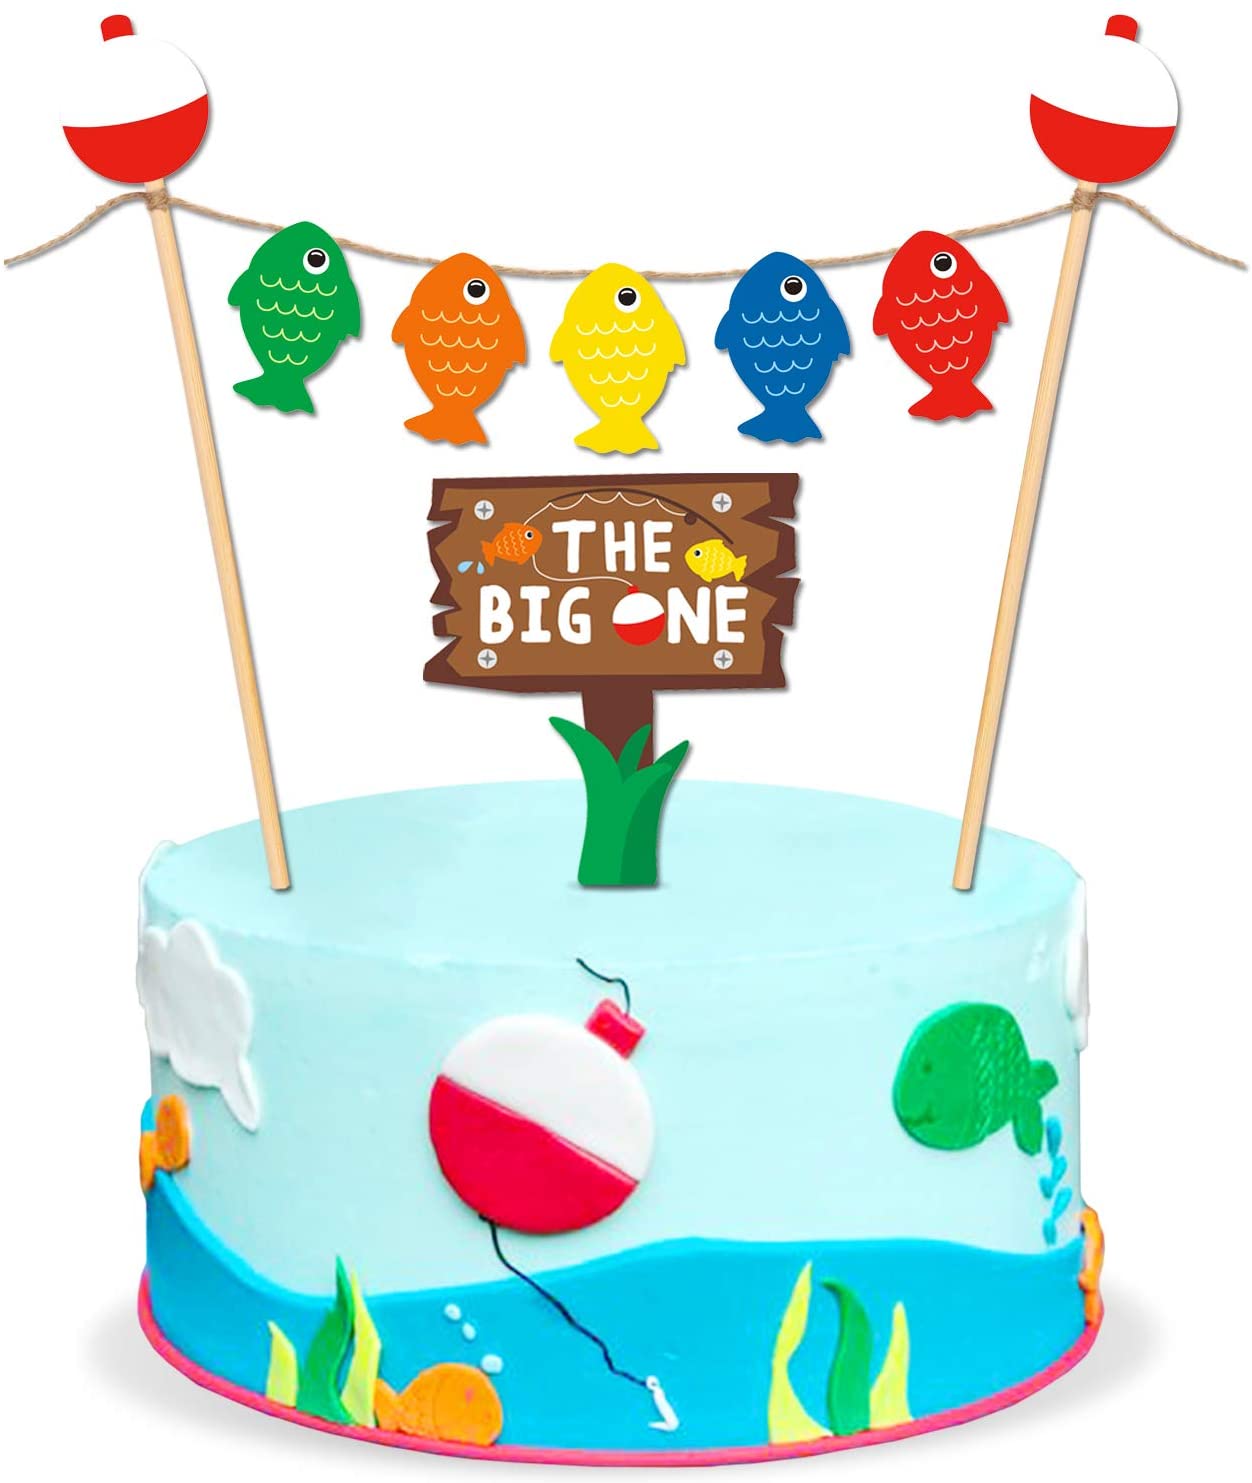 Hand Made "GONE FISHING" bobber banner.Great for Bitthday Parties.Happy birthday 